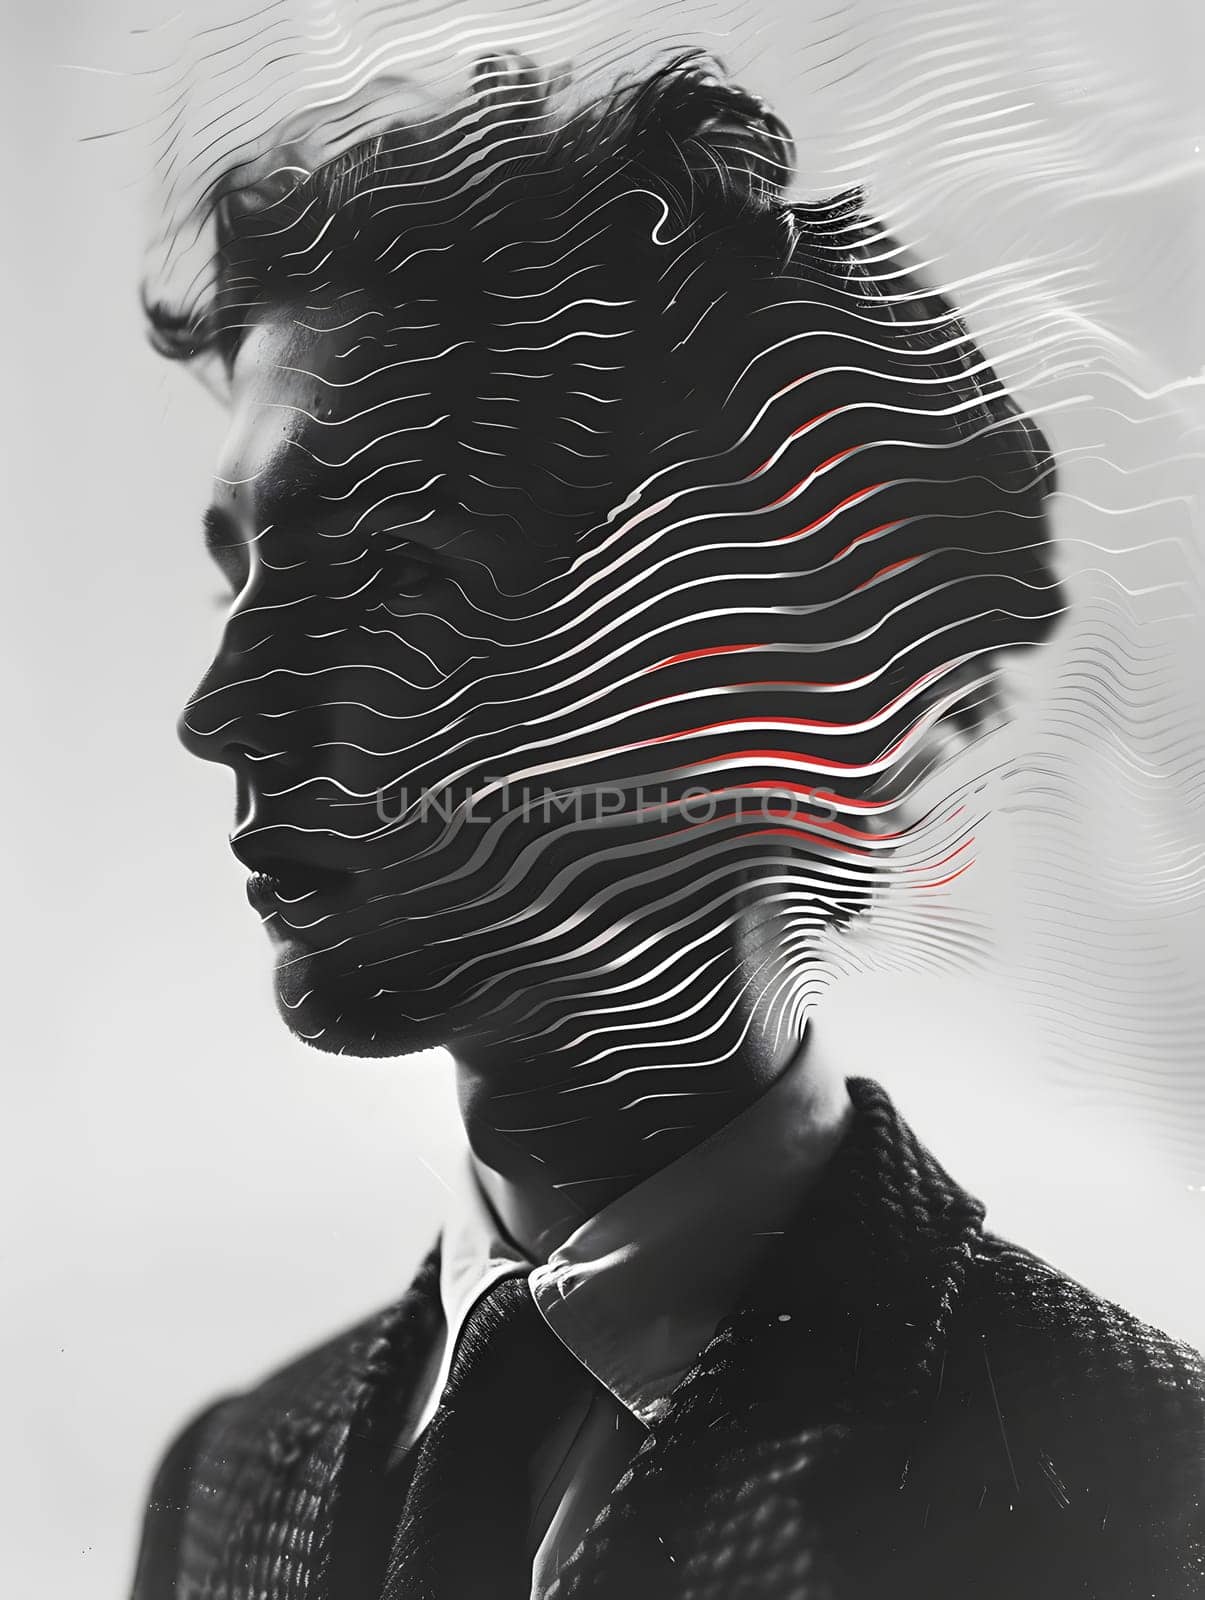 Monochrome portrait of man with zebra print on face, striking visual art by Nadtochiy